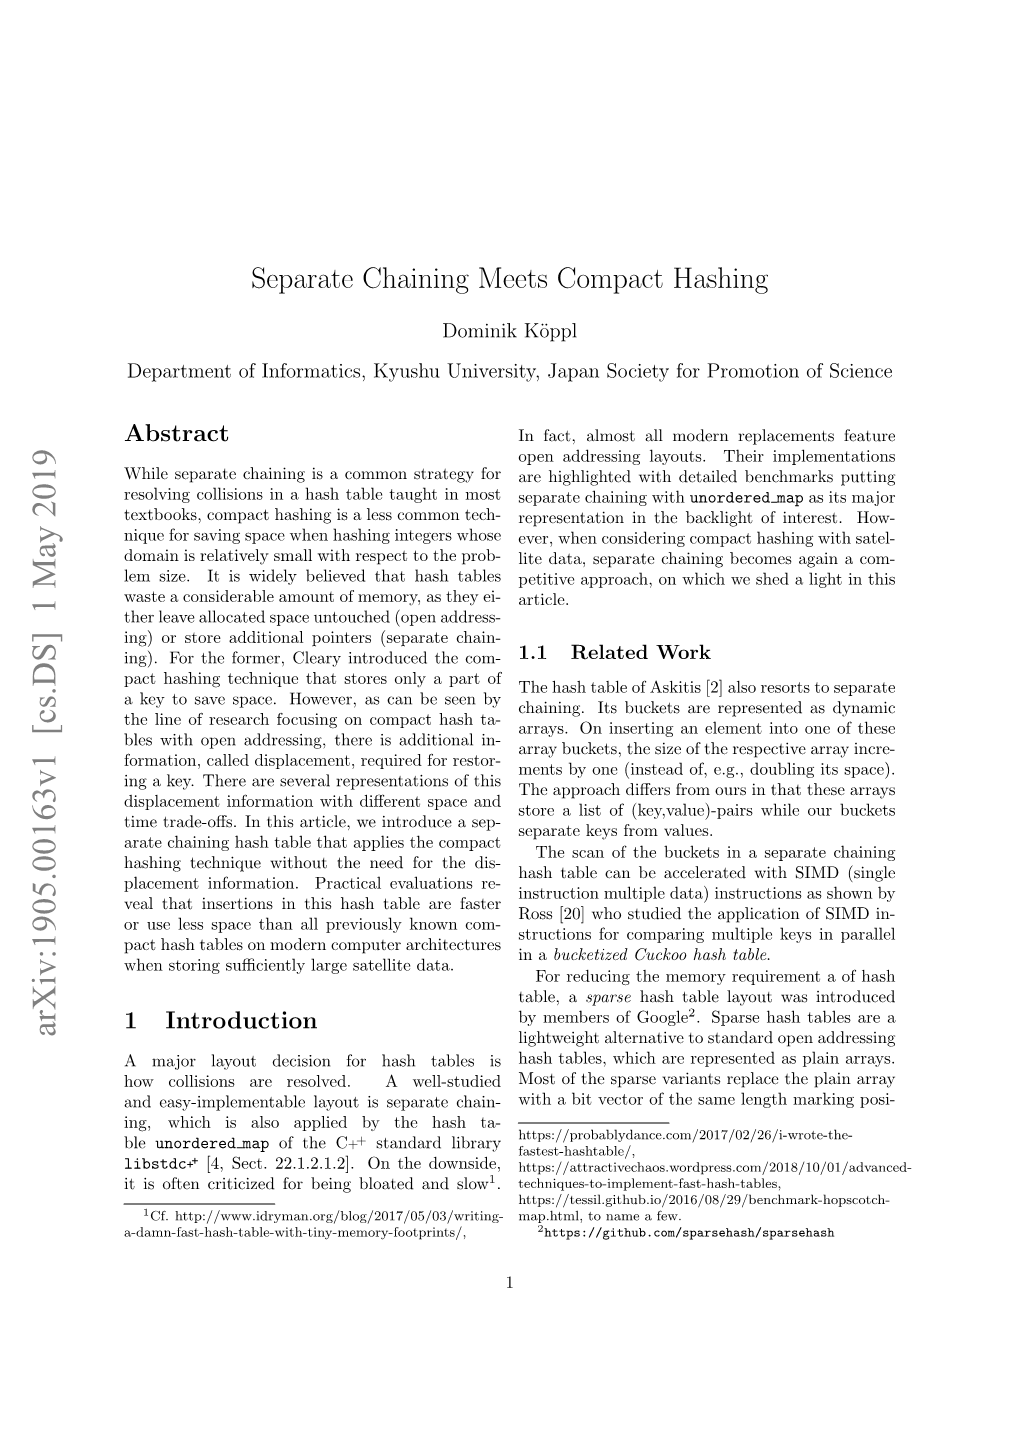 Separate Chaining Meets Compact Hashing